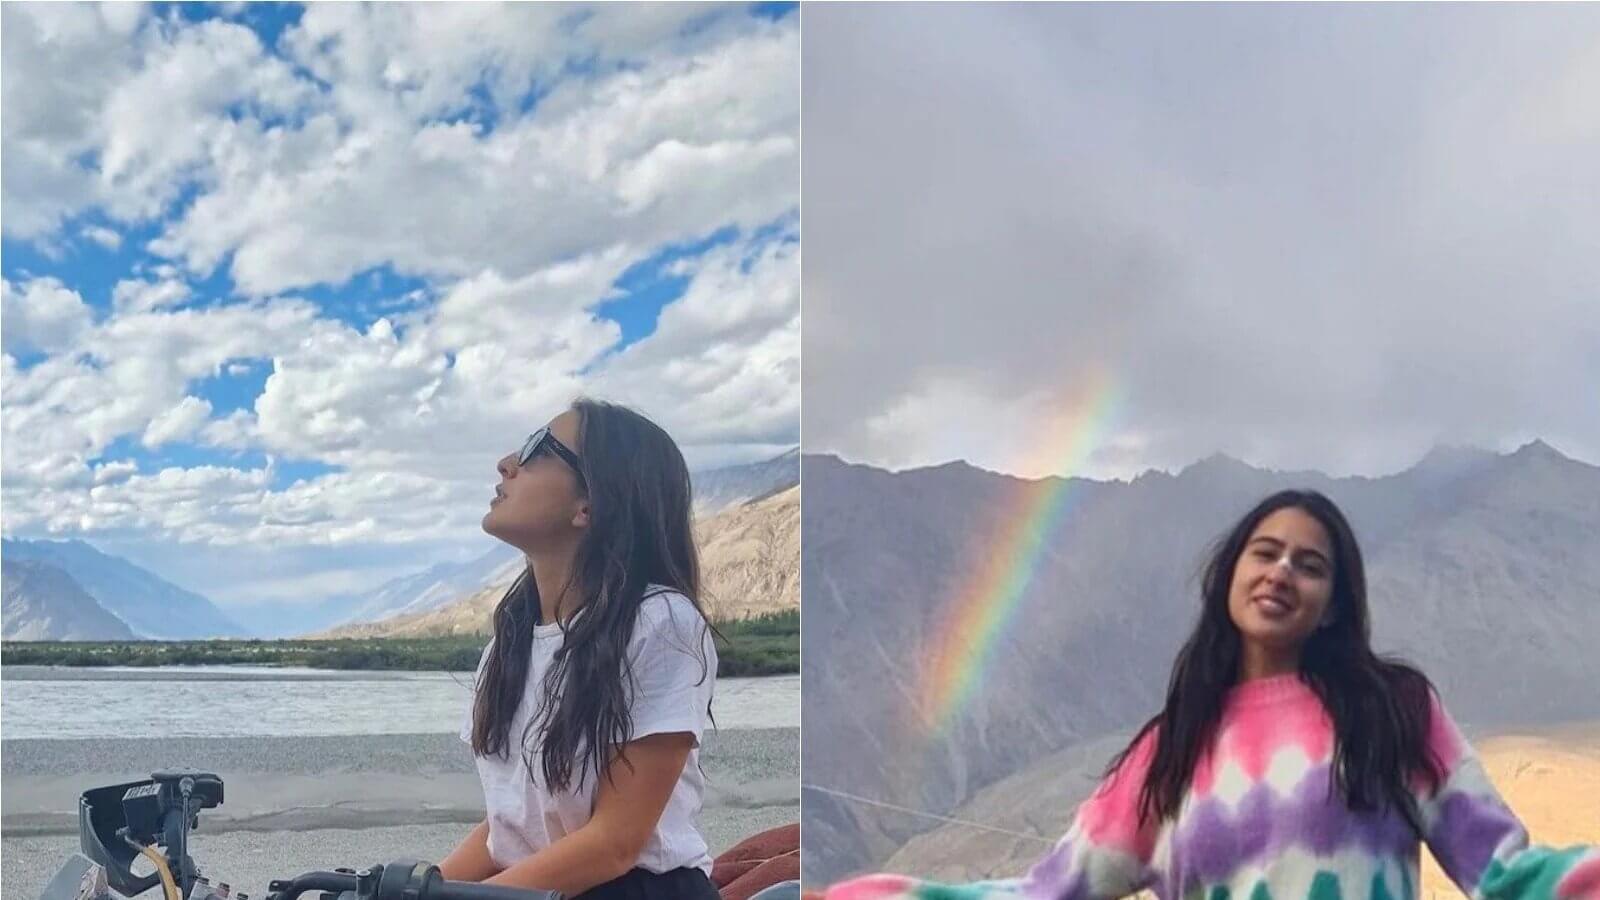 Sara Ali Khan flaunts her love for nature in new post